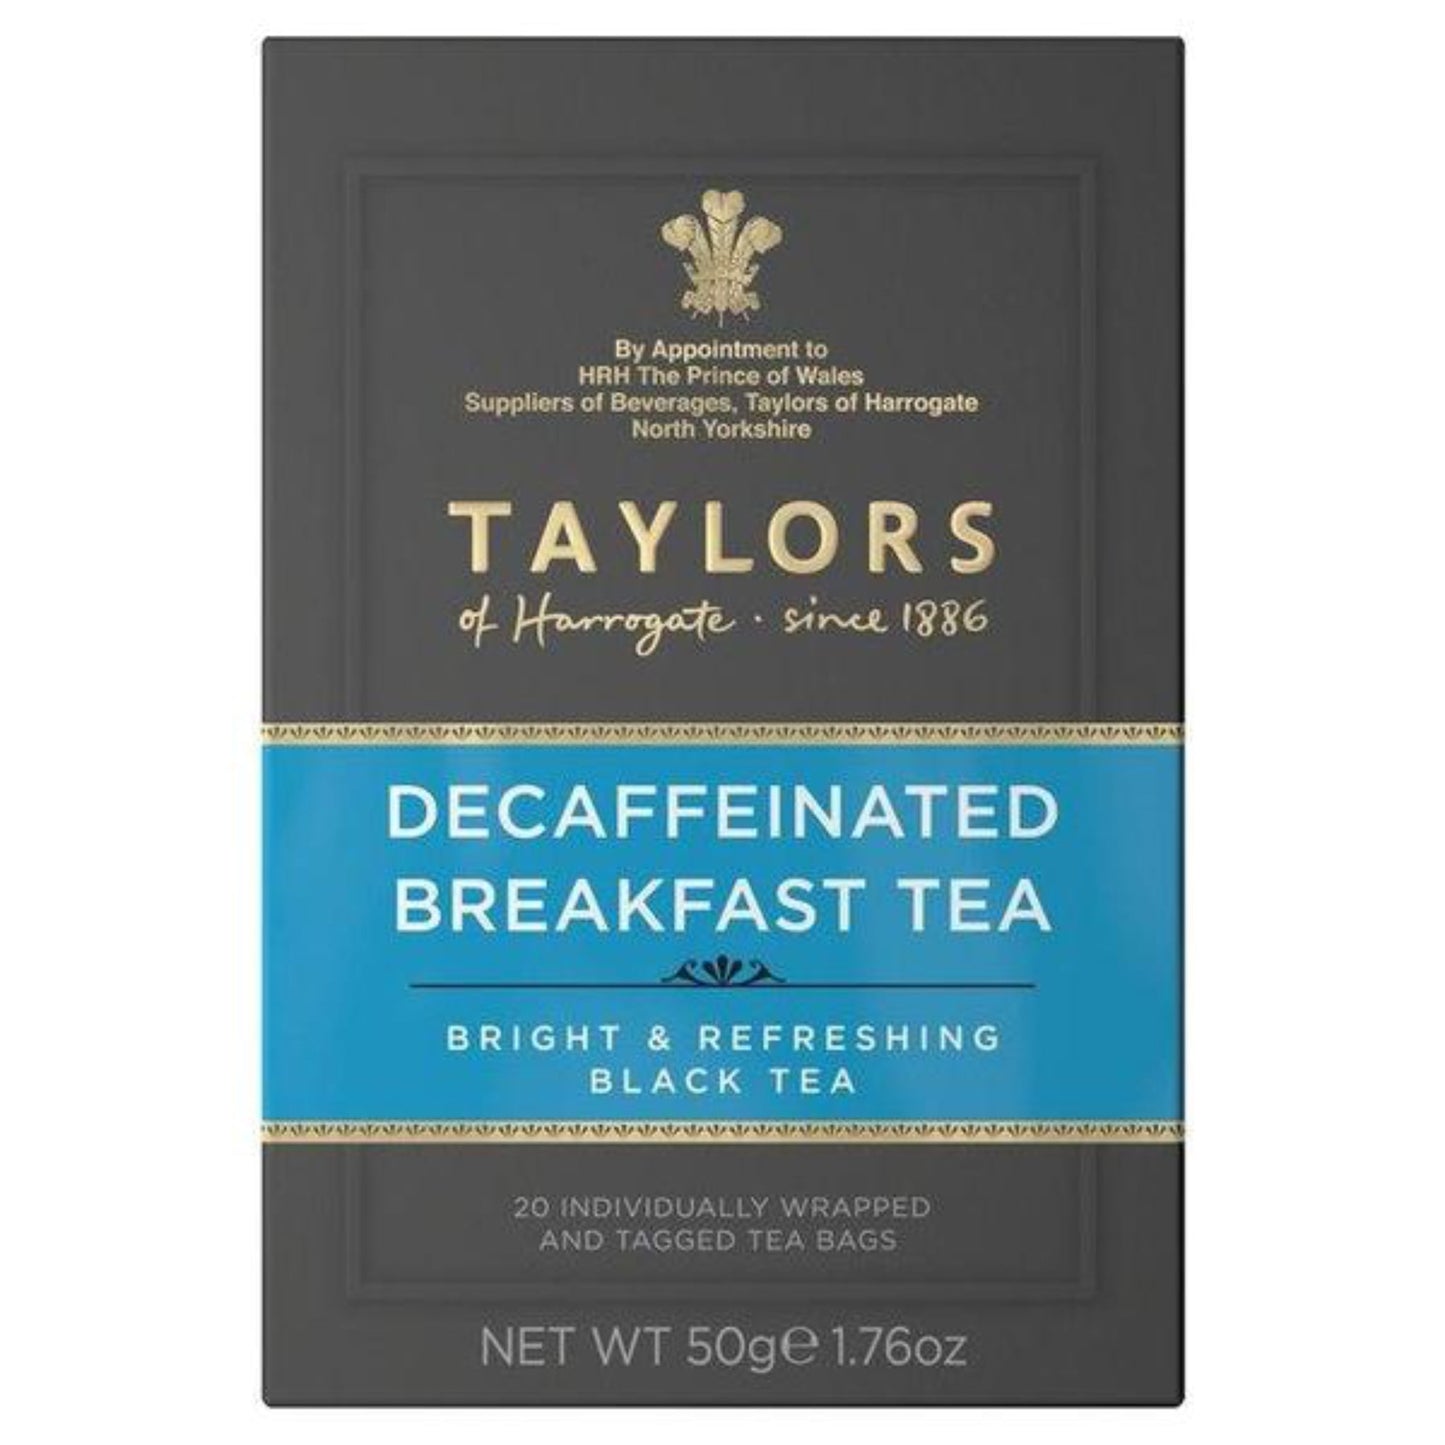 Decaffinated Breakfast Tea - The Great Yorkshire Shop